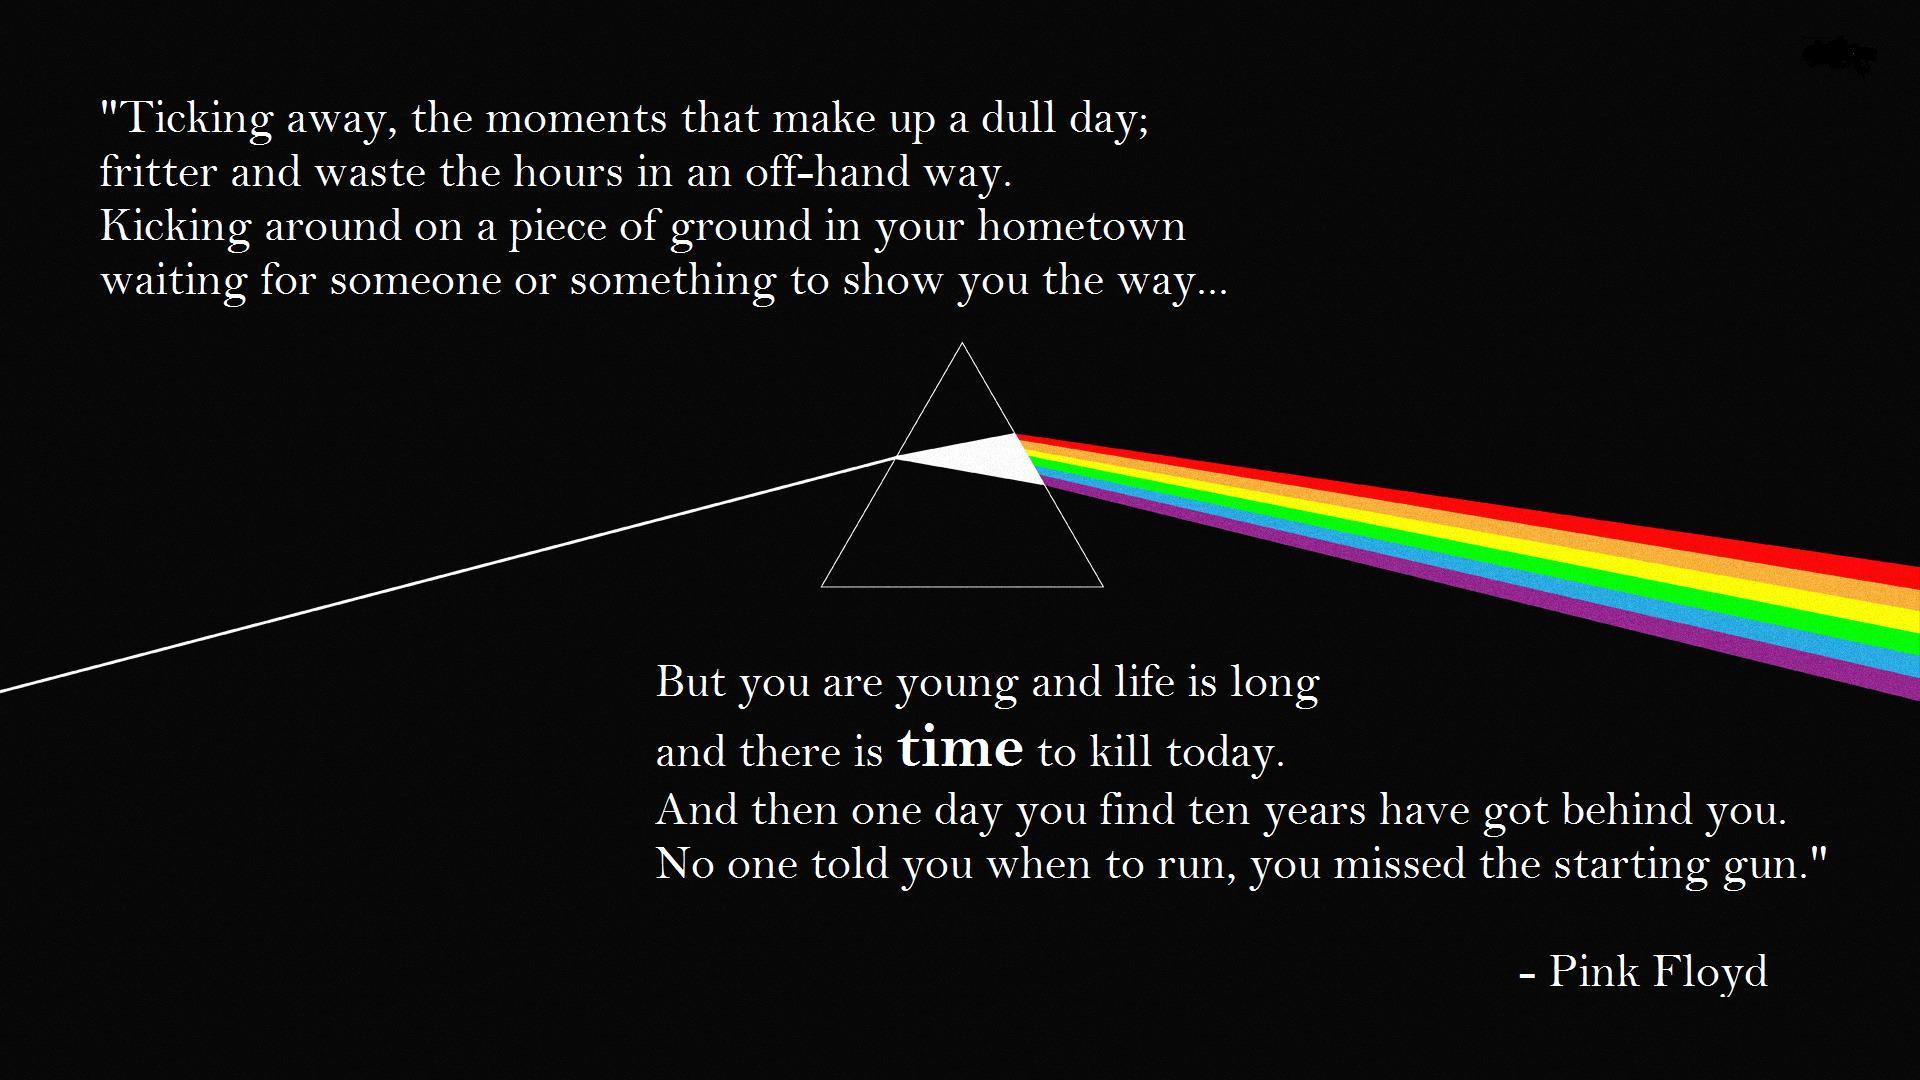 Ticking away, the moments that make up a dull day. Pink Floyd